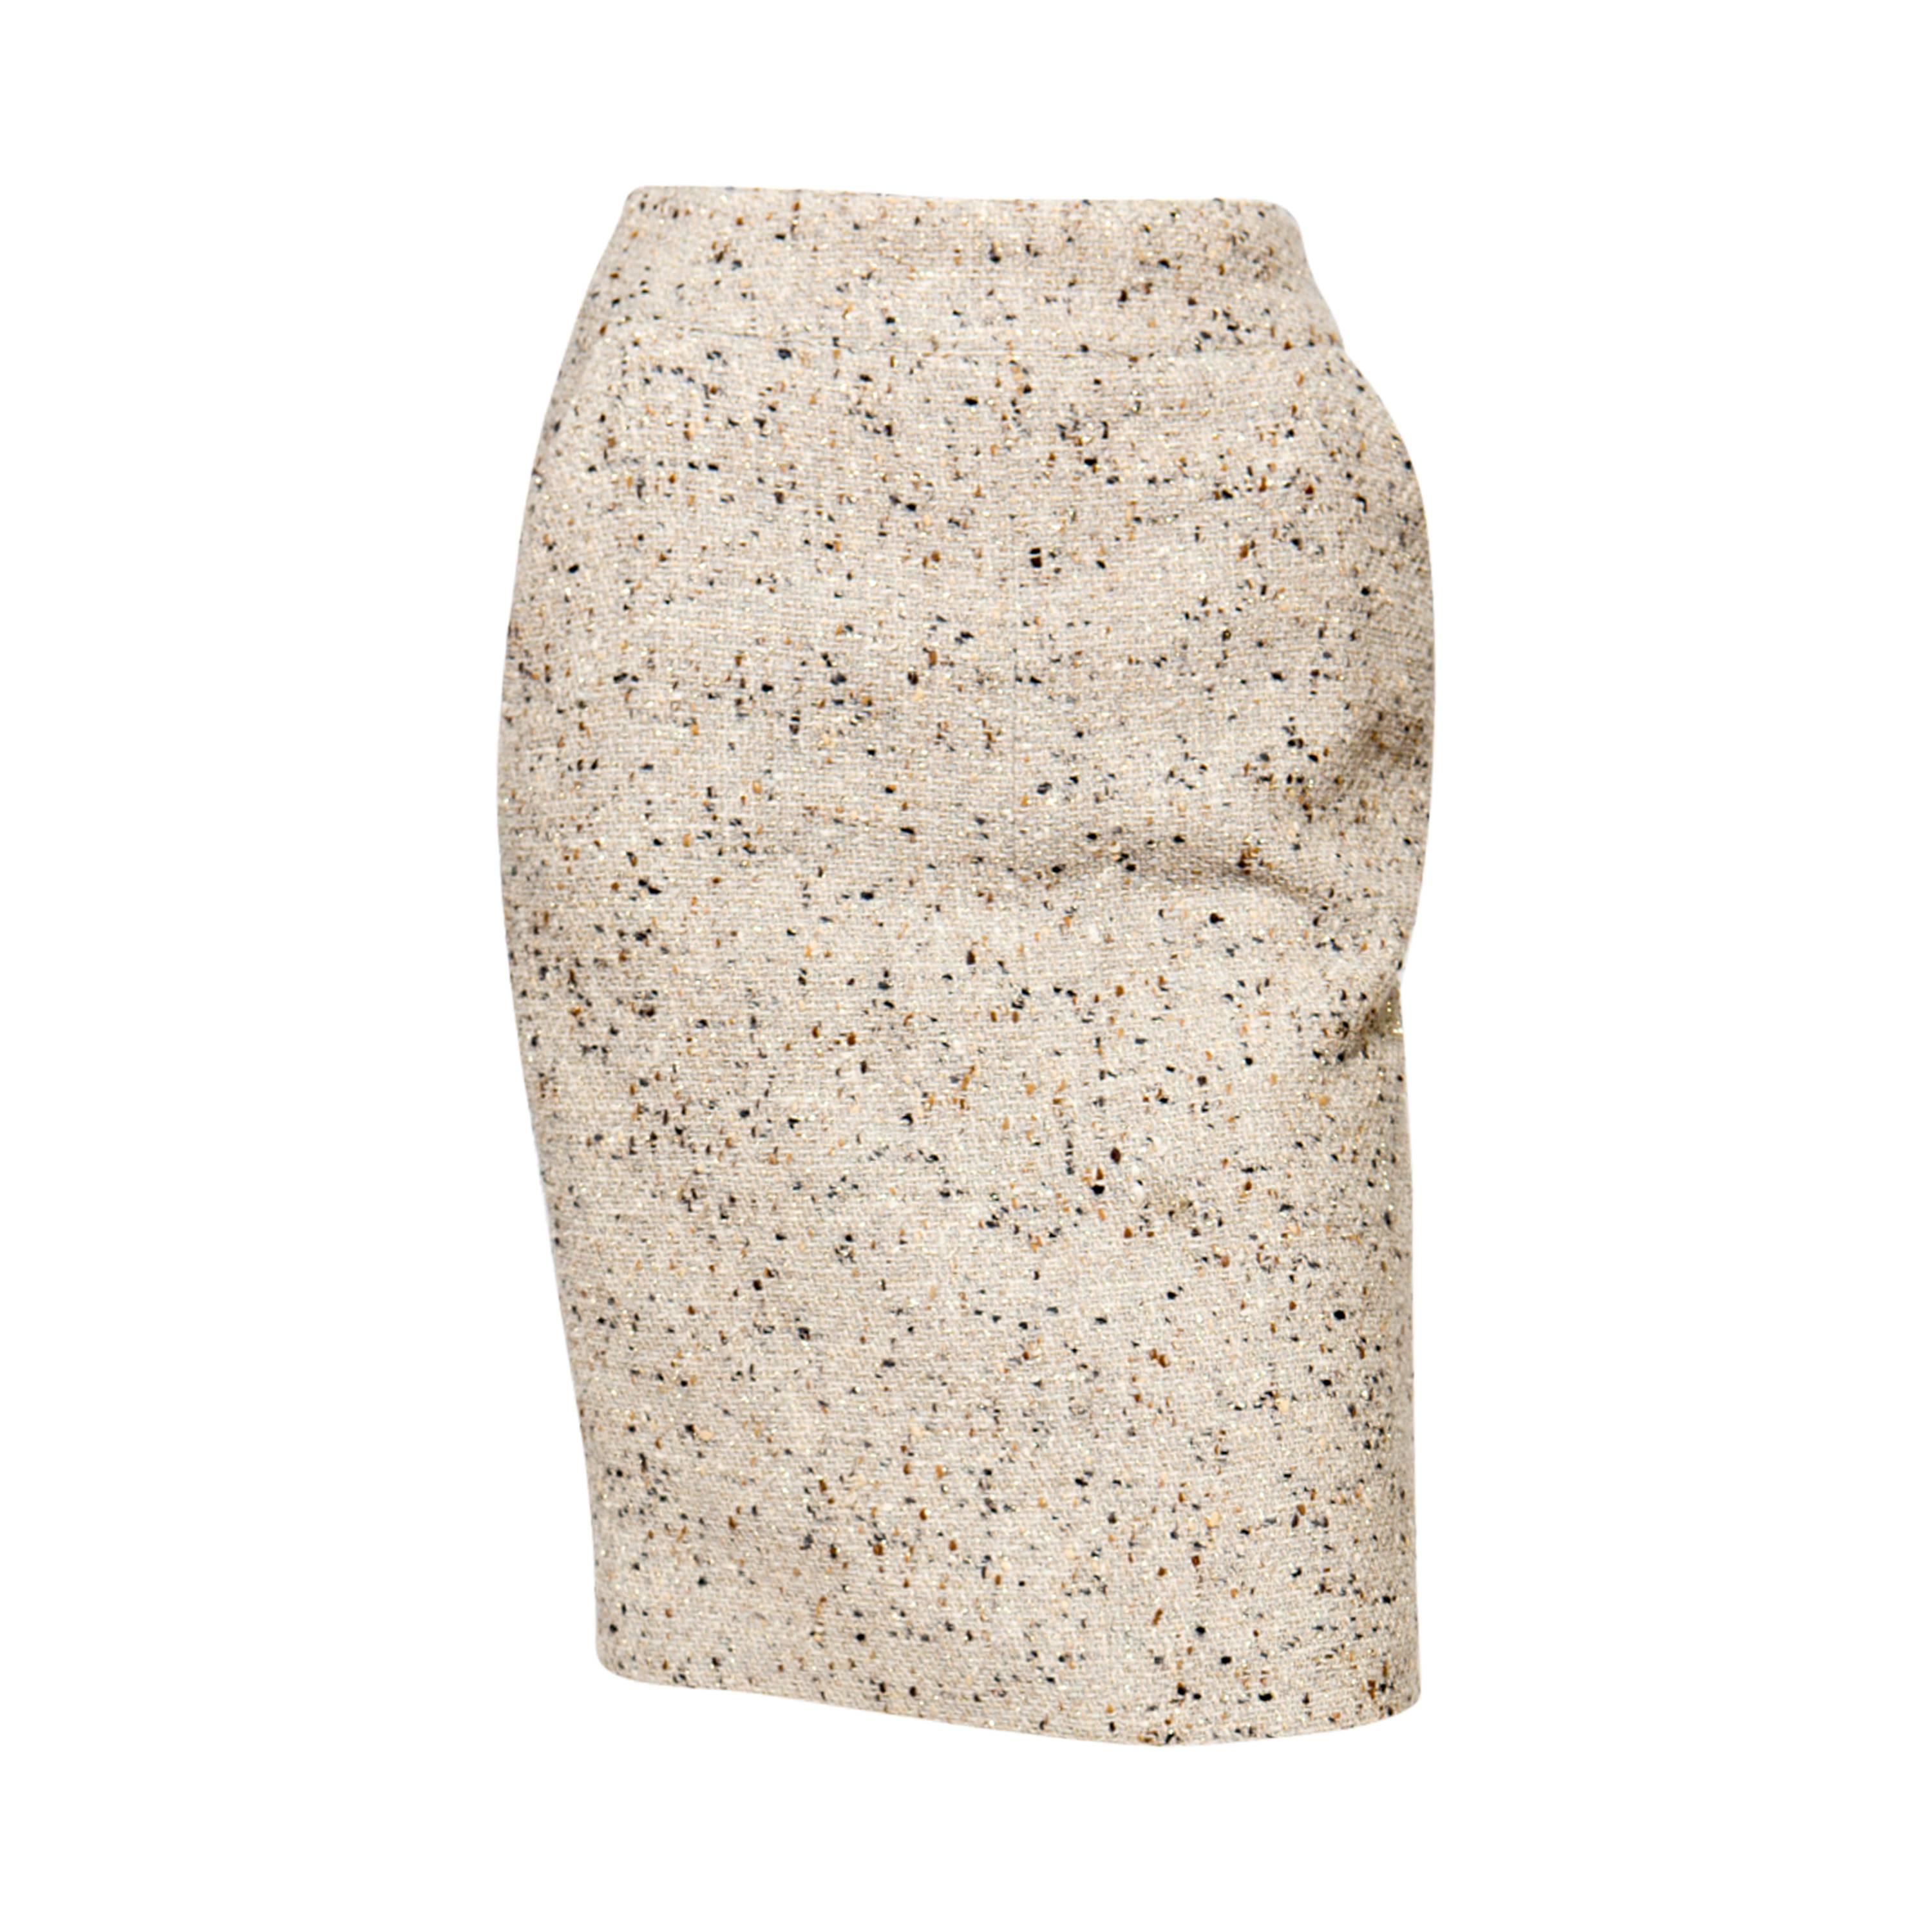  Chanel Camel Tweed and Lurex Skirt